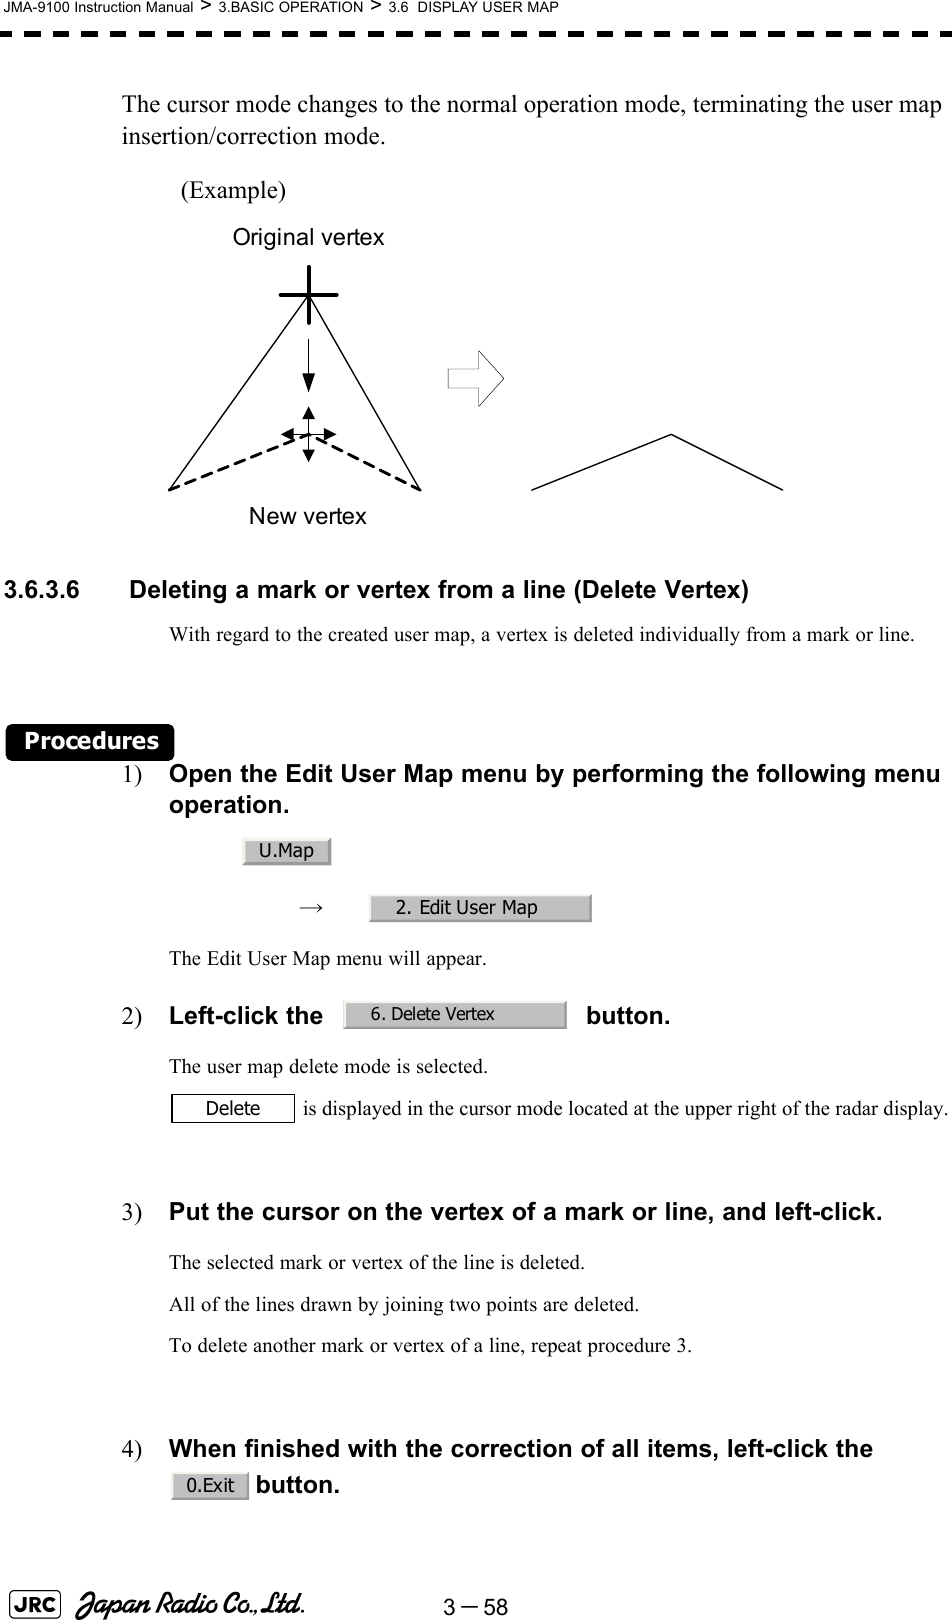 3－58JMA-9100 Instruction Manual &gt; 3.BASIC OPERATION &gt; 3.6  DISPLAY USER MAPThe cursor mode changes to the normal operation mode, terminating the user map insertion/correction mode.(Example)3.6.3.6  Deleting a mark or vertex from a line (Delete Vertex)With regard to the created user map, a vertex is deleted individually from a mark or line.Procedures1) Open the Edit User Map menu by performing the following menu operation.→　The Edit User Map menu will appear.2) Left-click the button.The user map delete mode is selected. is displayed in the cursor mode located at the upper right of the radar display.3) Put the cursor on the vertex of a mark or line, and left-click.The selected mark or vertex of the line is deleted.All of the lines drawn by joining two points are deleted.To delete another mark or vertex of a line, repeat procedure 3.4) When finished with the correction of all items, left-click the button.Original vertexNew vertexU.Map2. Edit User Map6. Delete VertexDelete0.Exit